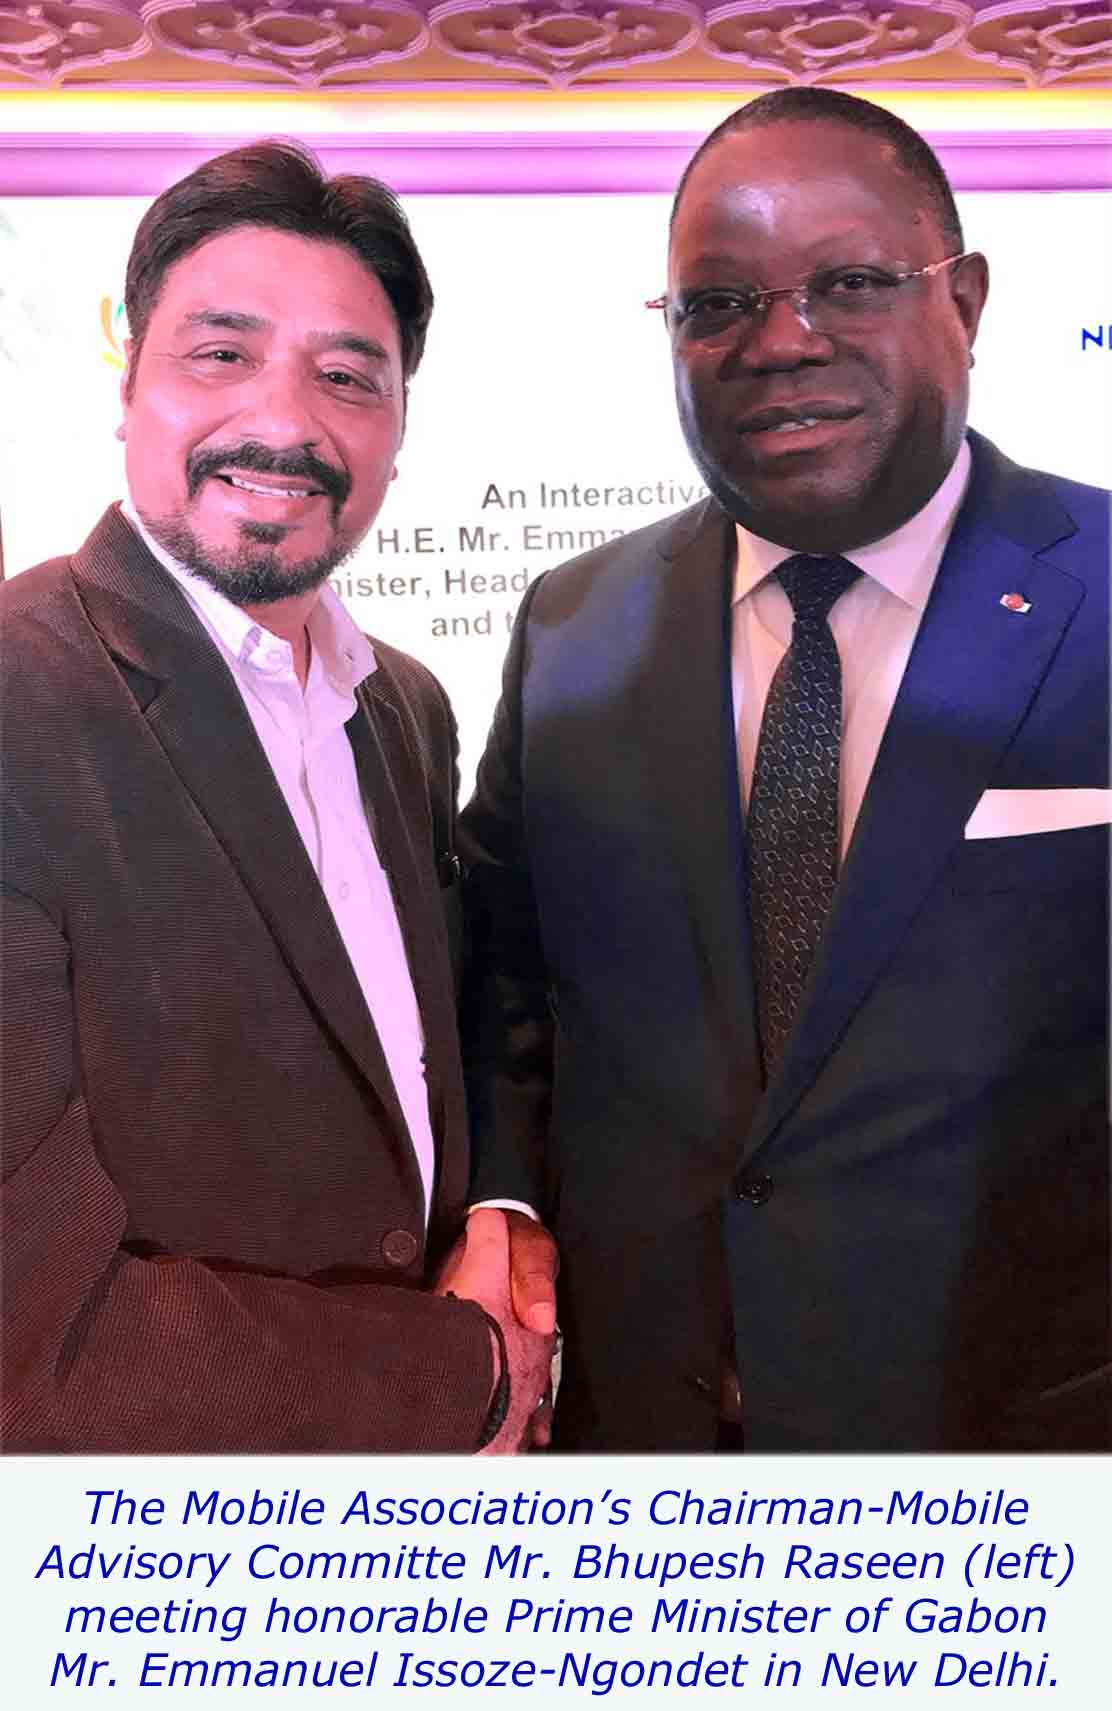 TMA News of The Mobile Association Meeting with the Honorable Prime Minister of Gabon Mr. Emmaneul Issoze–Ngondet at New Delhi